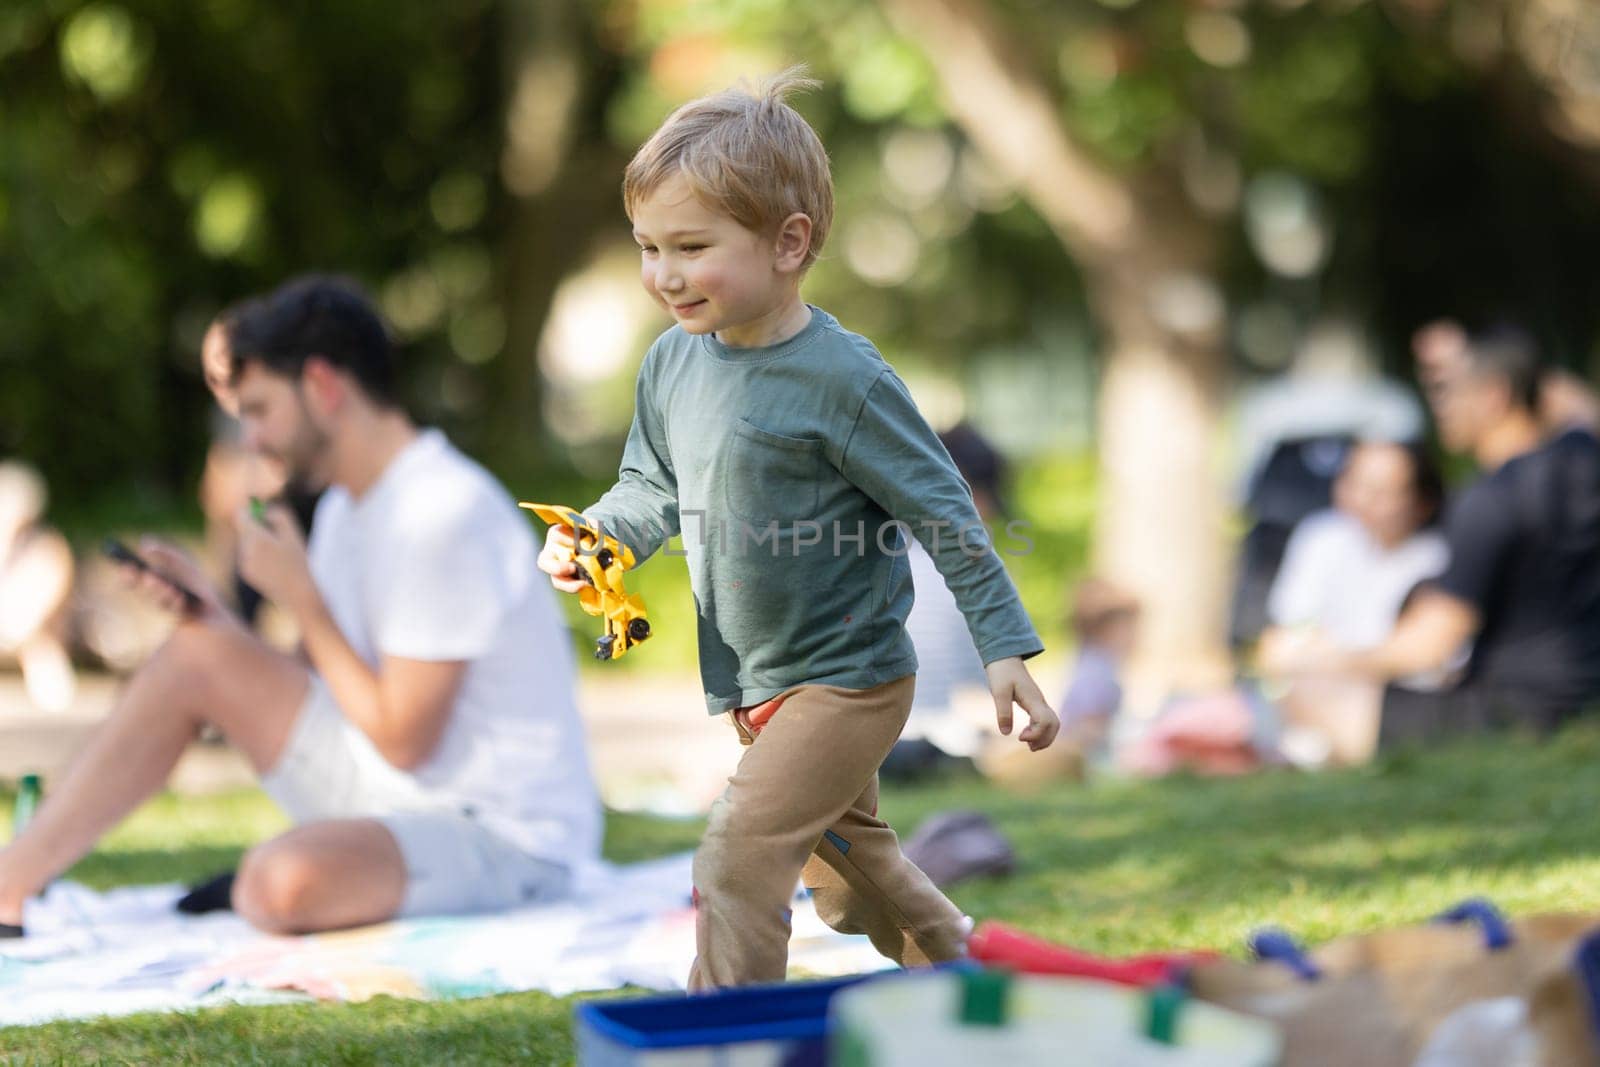 A young boy is playing with a toy truck in a park. There are other people in the background, some of whom are sitting on blankets